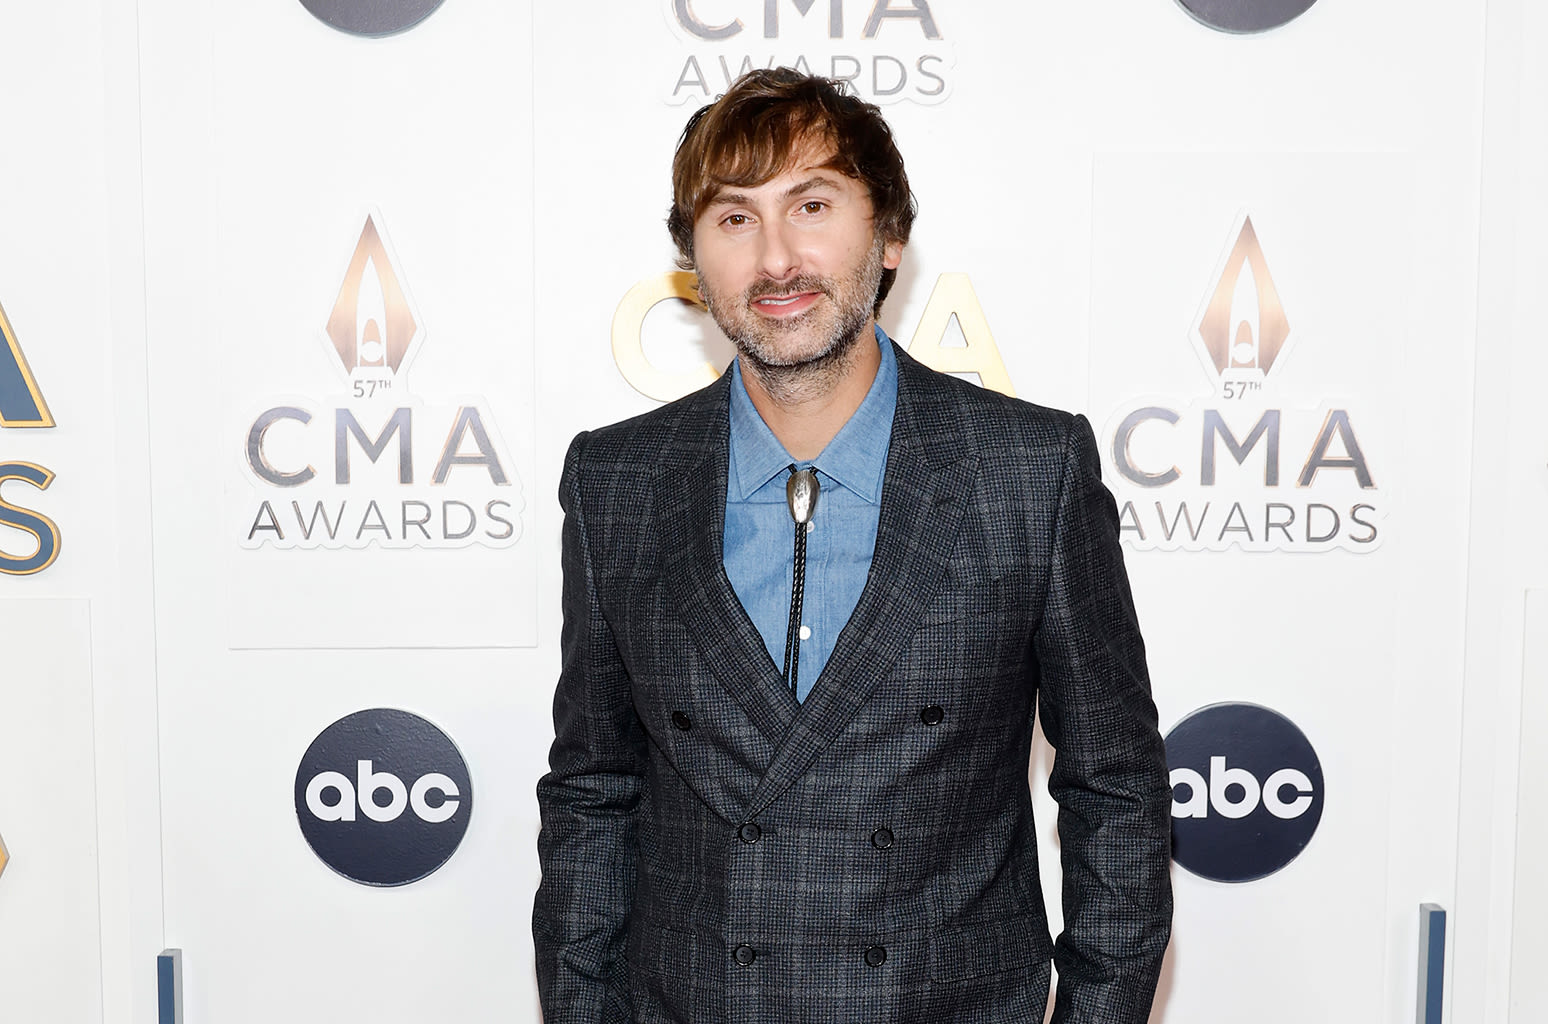 Lady A’s Dave Haywood & Wife Kelli Are Expecting Their Third Child: ‘Always Been a Big Fan of Trios’